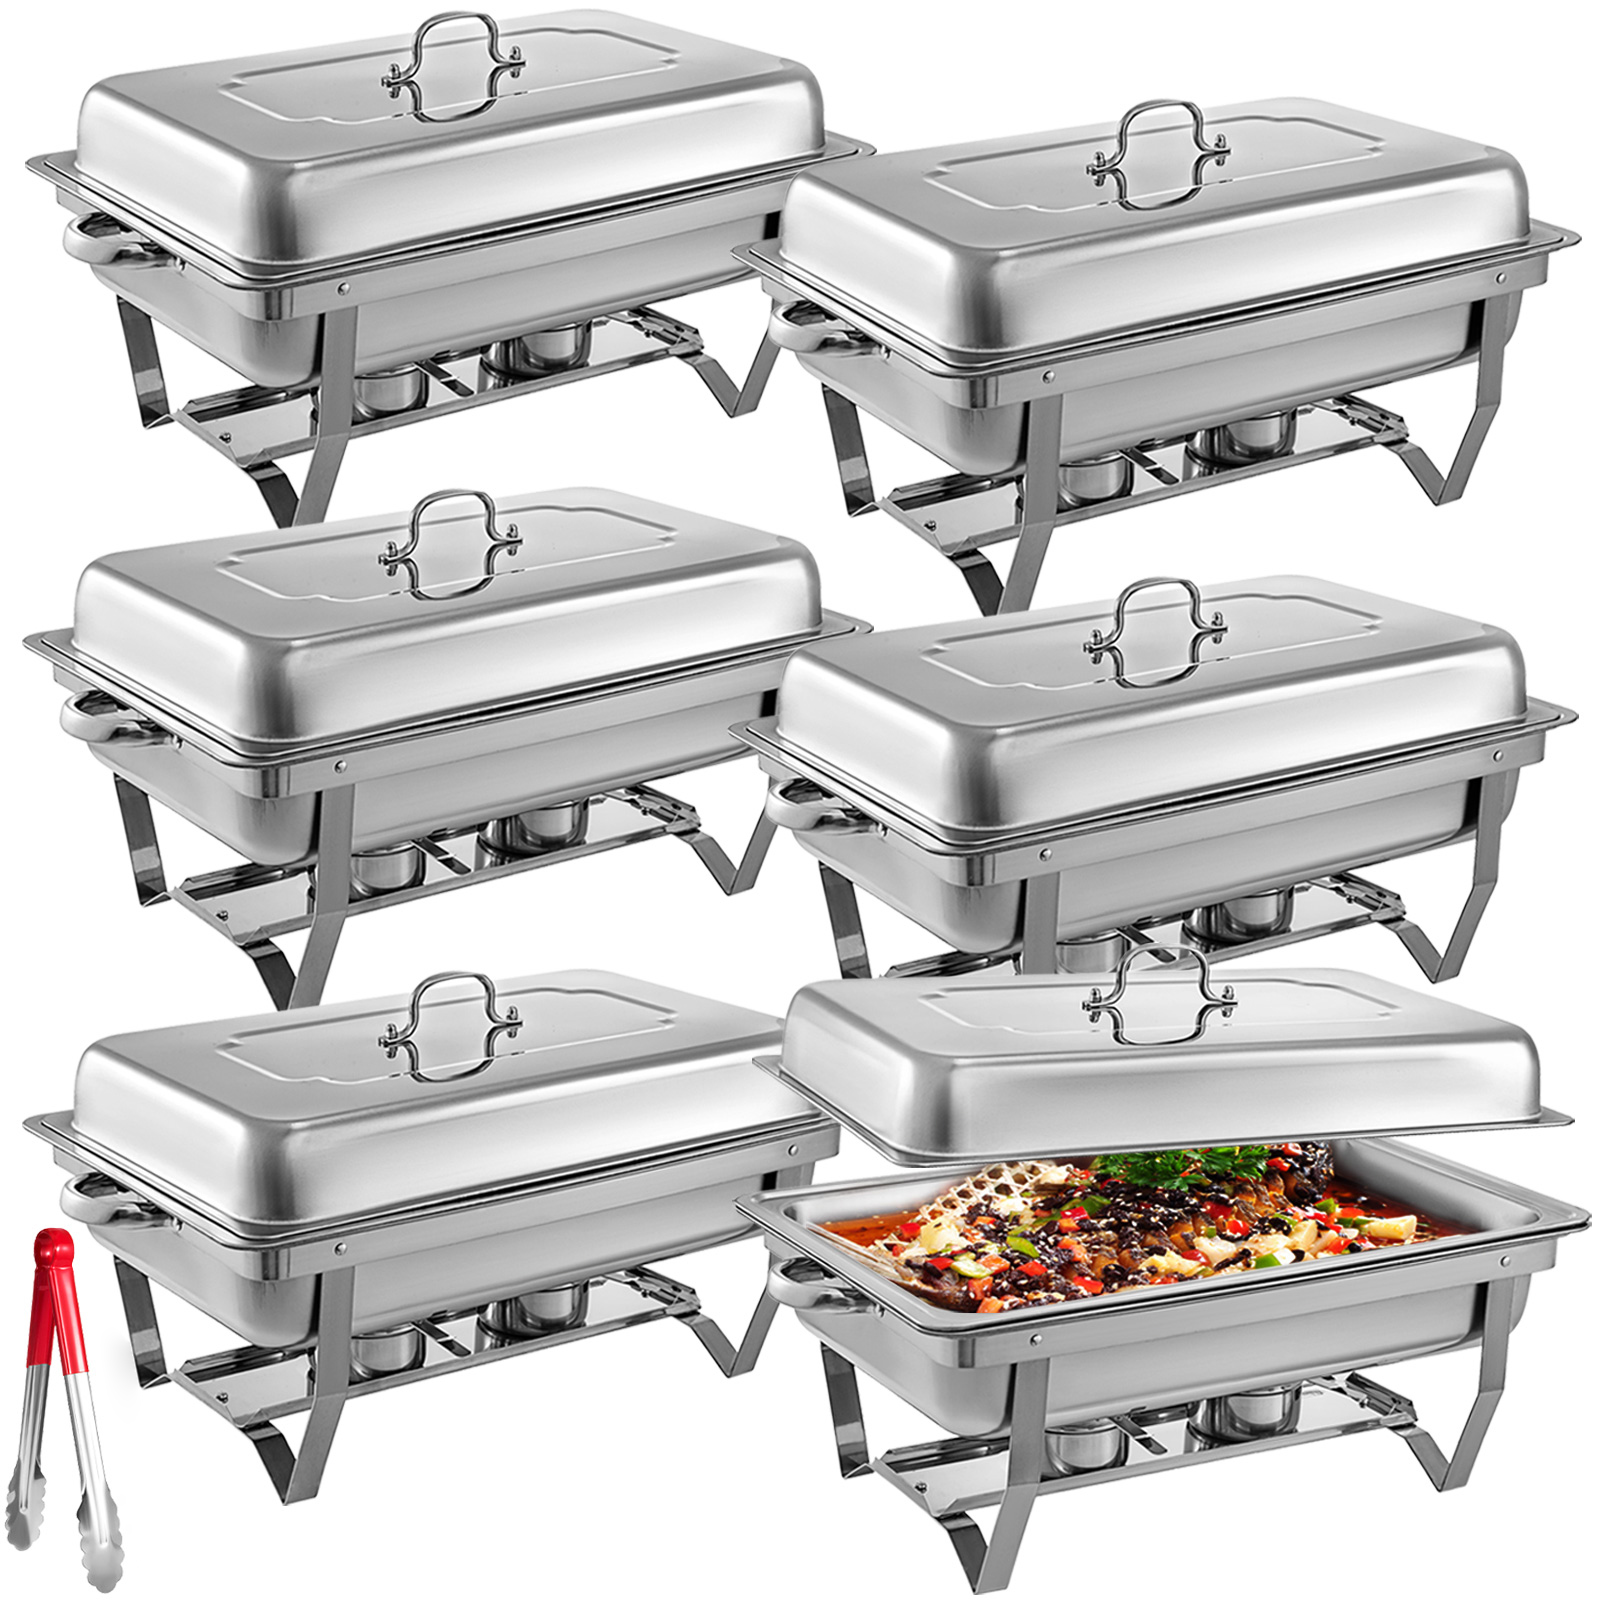 2 PACK CATERING STAINLESS STEEL CHAFER CHAFING DISH SETS 5 QT PARTY PACK 